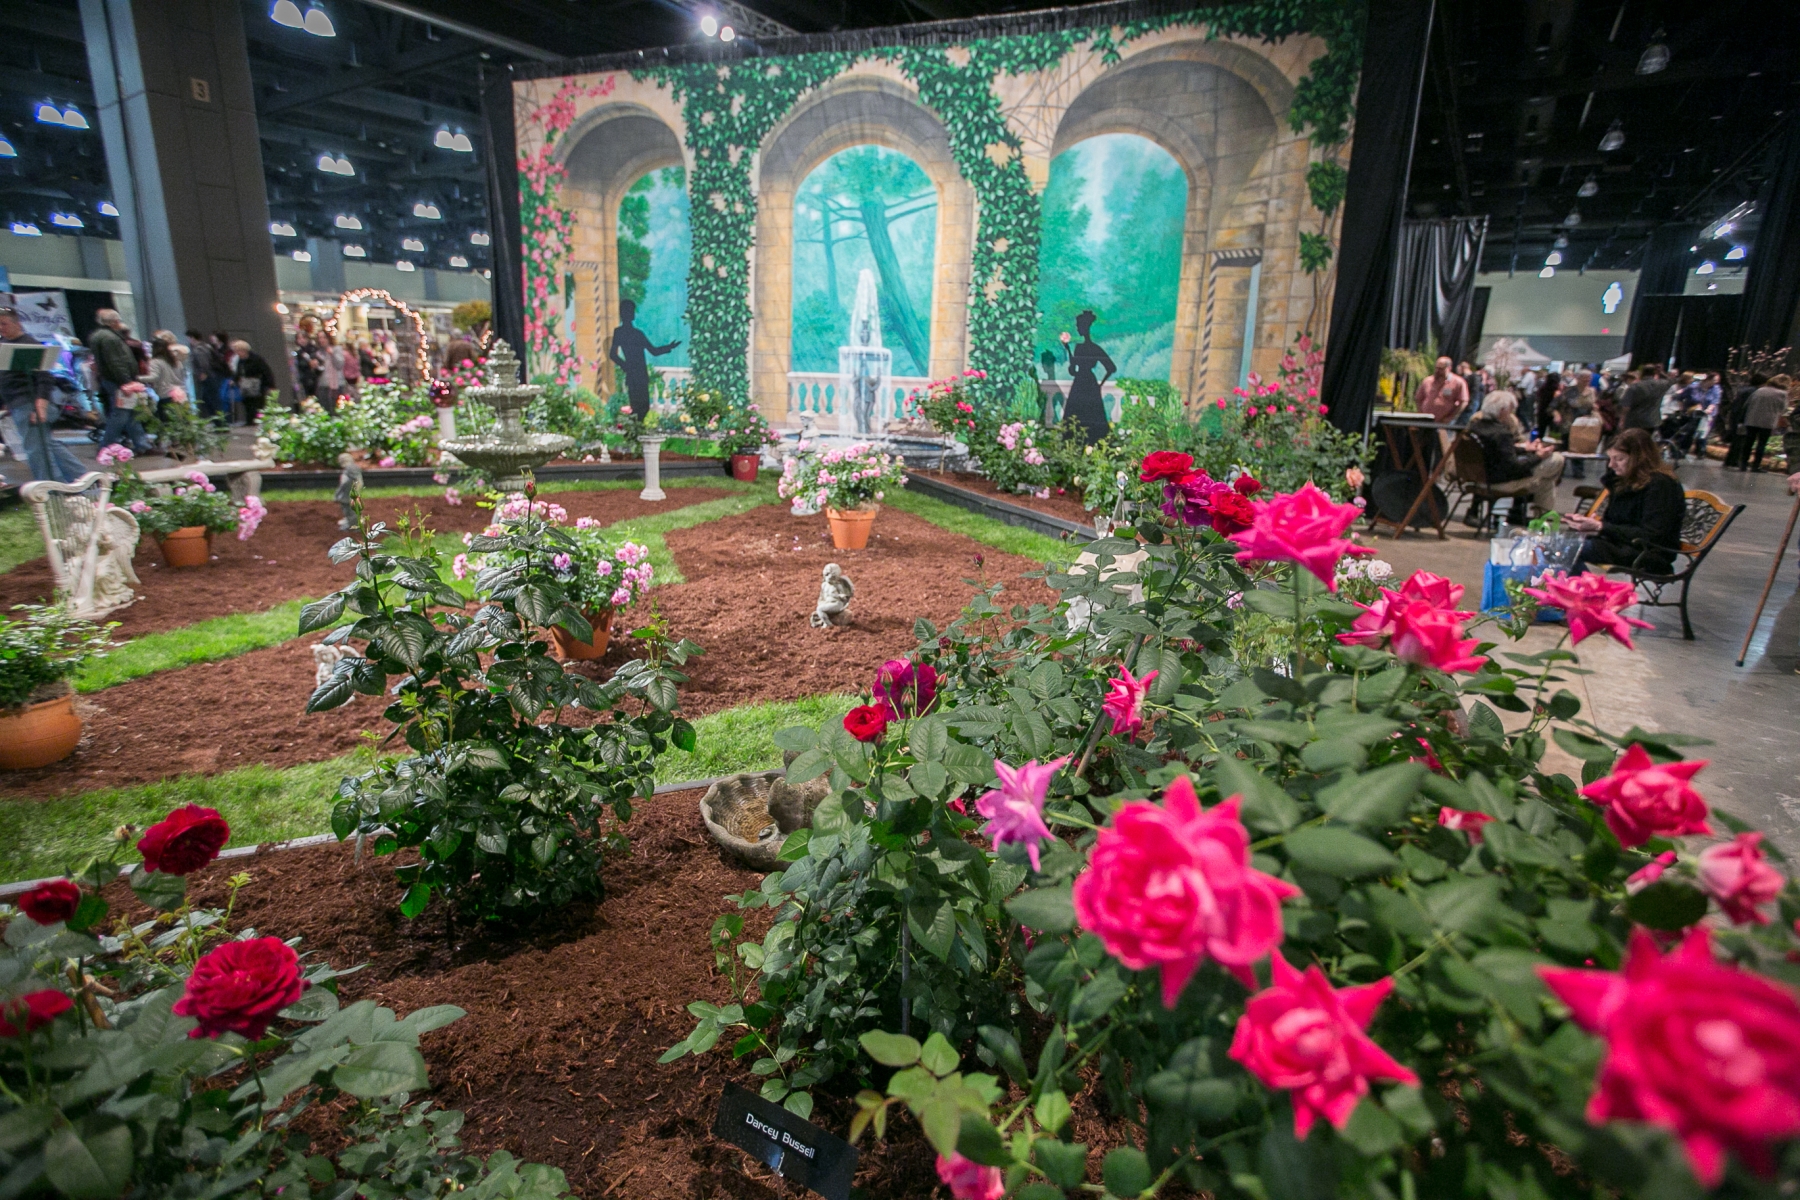 Highlights from the 38th Annual Connecticut Flower & Garden Show